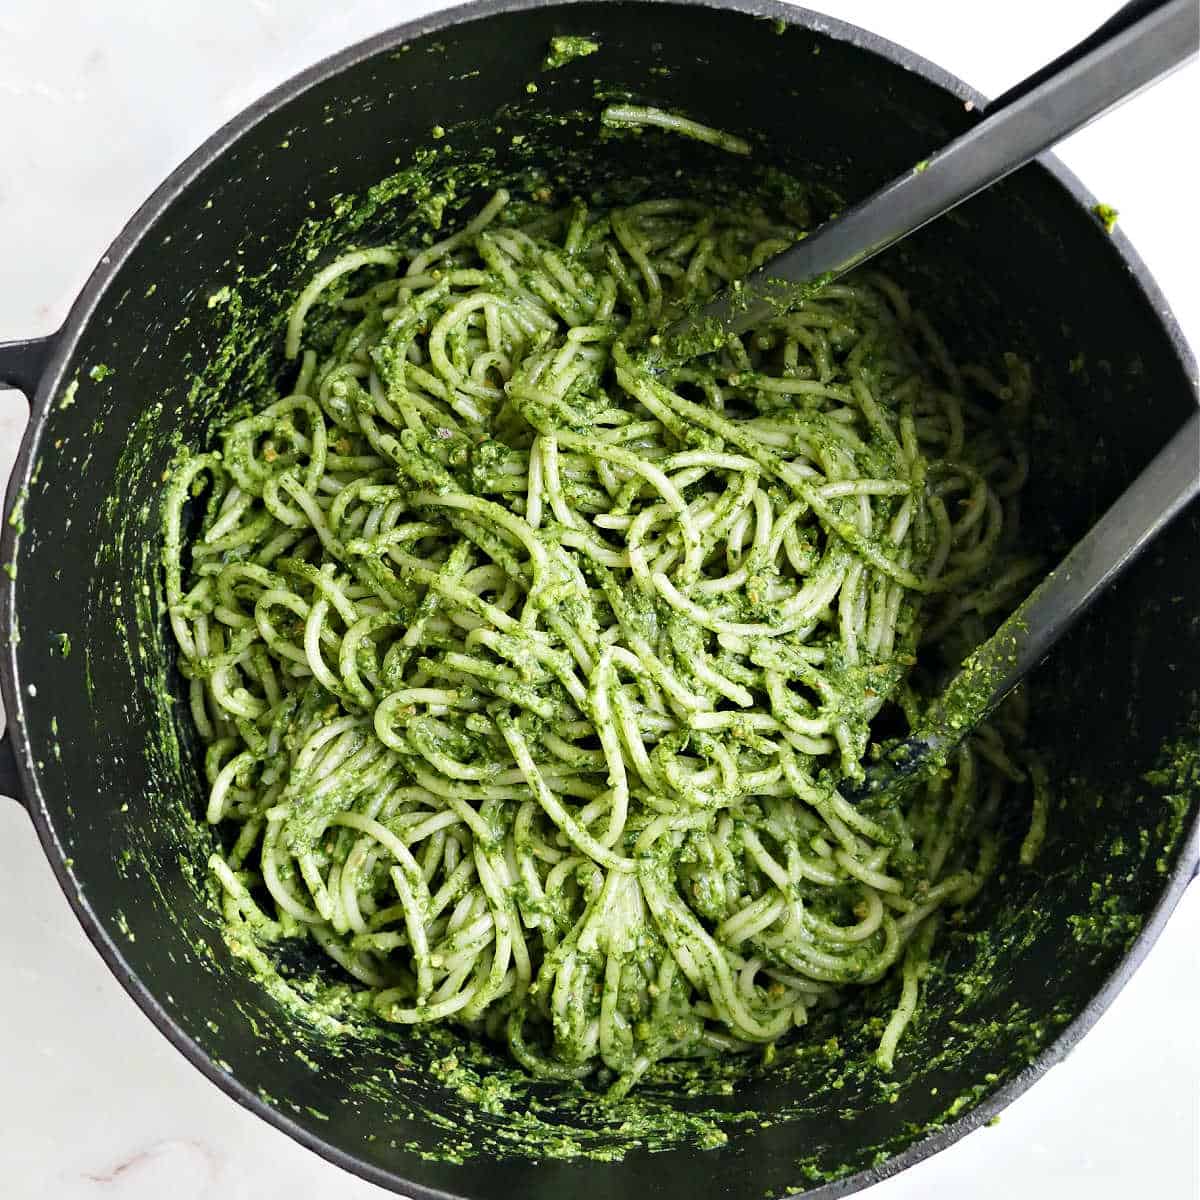 Spaghetti tossed with green pasta sauce in a large pot with tongs.